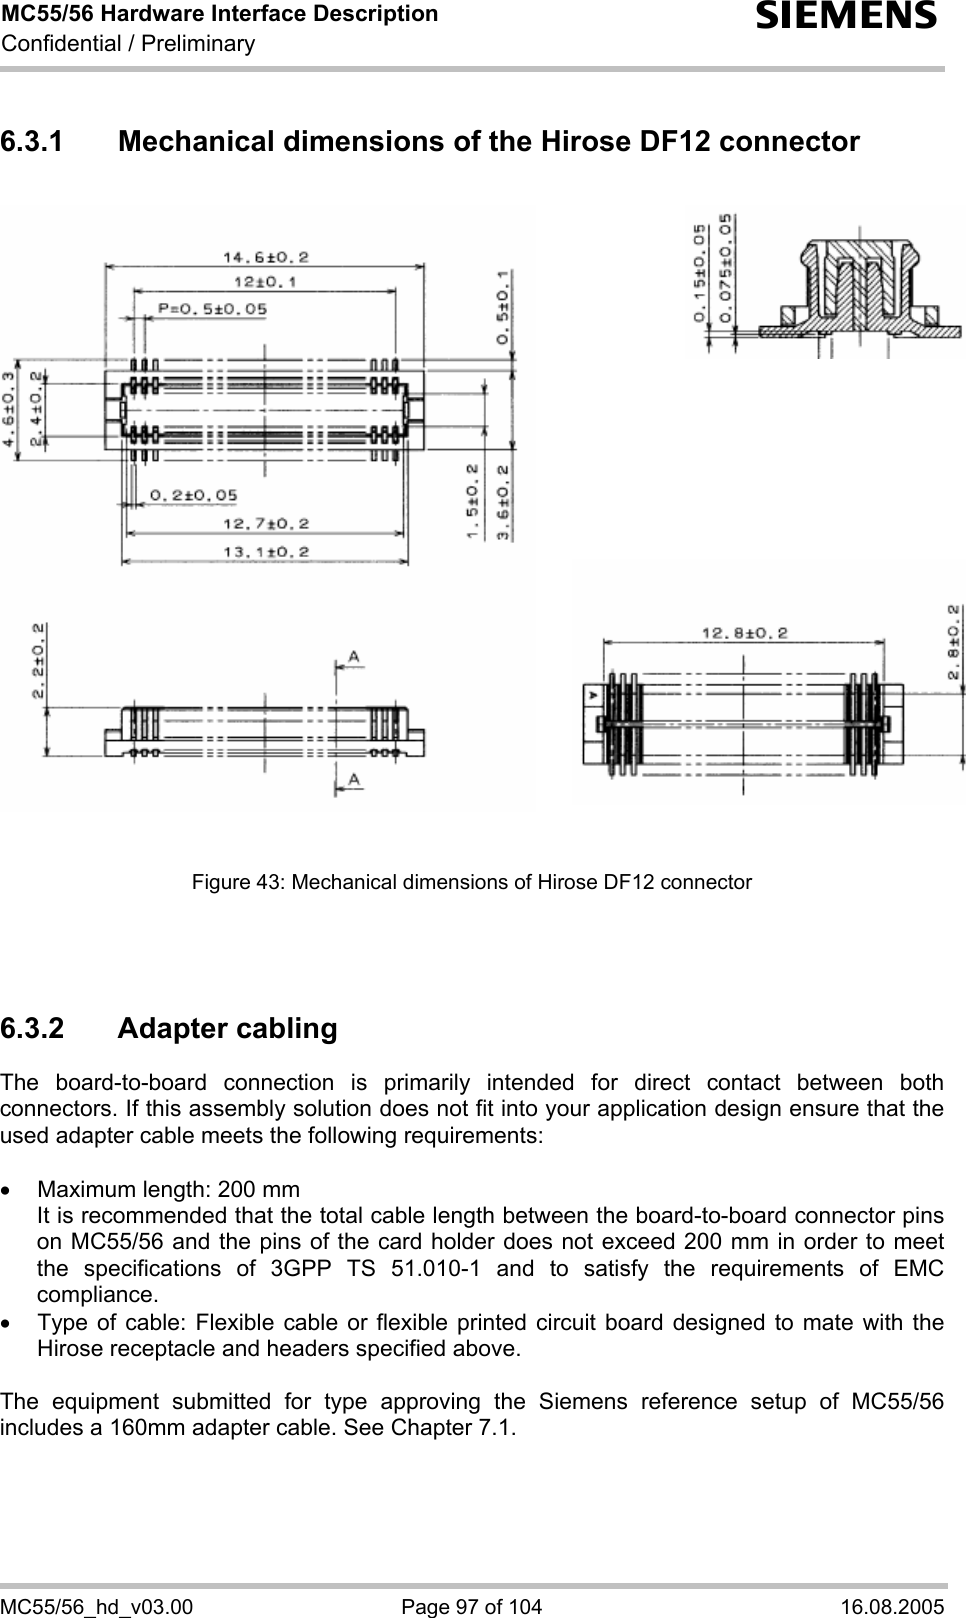 MC55/56 Hardware Interface Description Confidential / Preliminary s MC55/56_hd_v03.00  Page 97 of 104  16.08.2005 6.3.1  Mechanical dimensions of the Hirose DF12 connector                 Figure 43: Mechanical dimensions of Hirose DF12 connector    6.3.2 Adapter cabling The board-to-board connection is primarily intended for direct contact between both connectors. If this assembly solution does not fit into your application design ensure that the used adapter cable meets the following requirements:  •  Maximum length: 200 mm It is recommended that the total cable length between the board-to-board connector pins on MC55/56 and the pins of the card holder does not exceed 200 mm in order to meet the specifications of 3GPP TS 51.010-1 and to satisfy the requirements of EMC compliance. •  Type of cable: Flexible cable or flexible printed circuit board designed to mate with the Hirose receptacle and headers specified above.   The equipment submitted for type approving the Siemens reference setup of MC55/56 includes a 160mm adapter cable. See Chapter 7.1.  